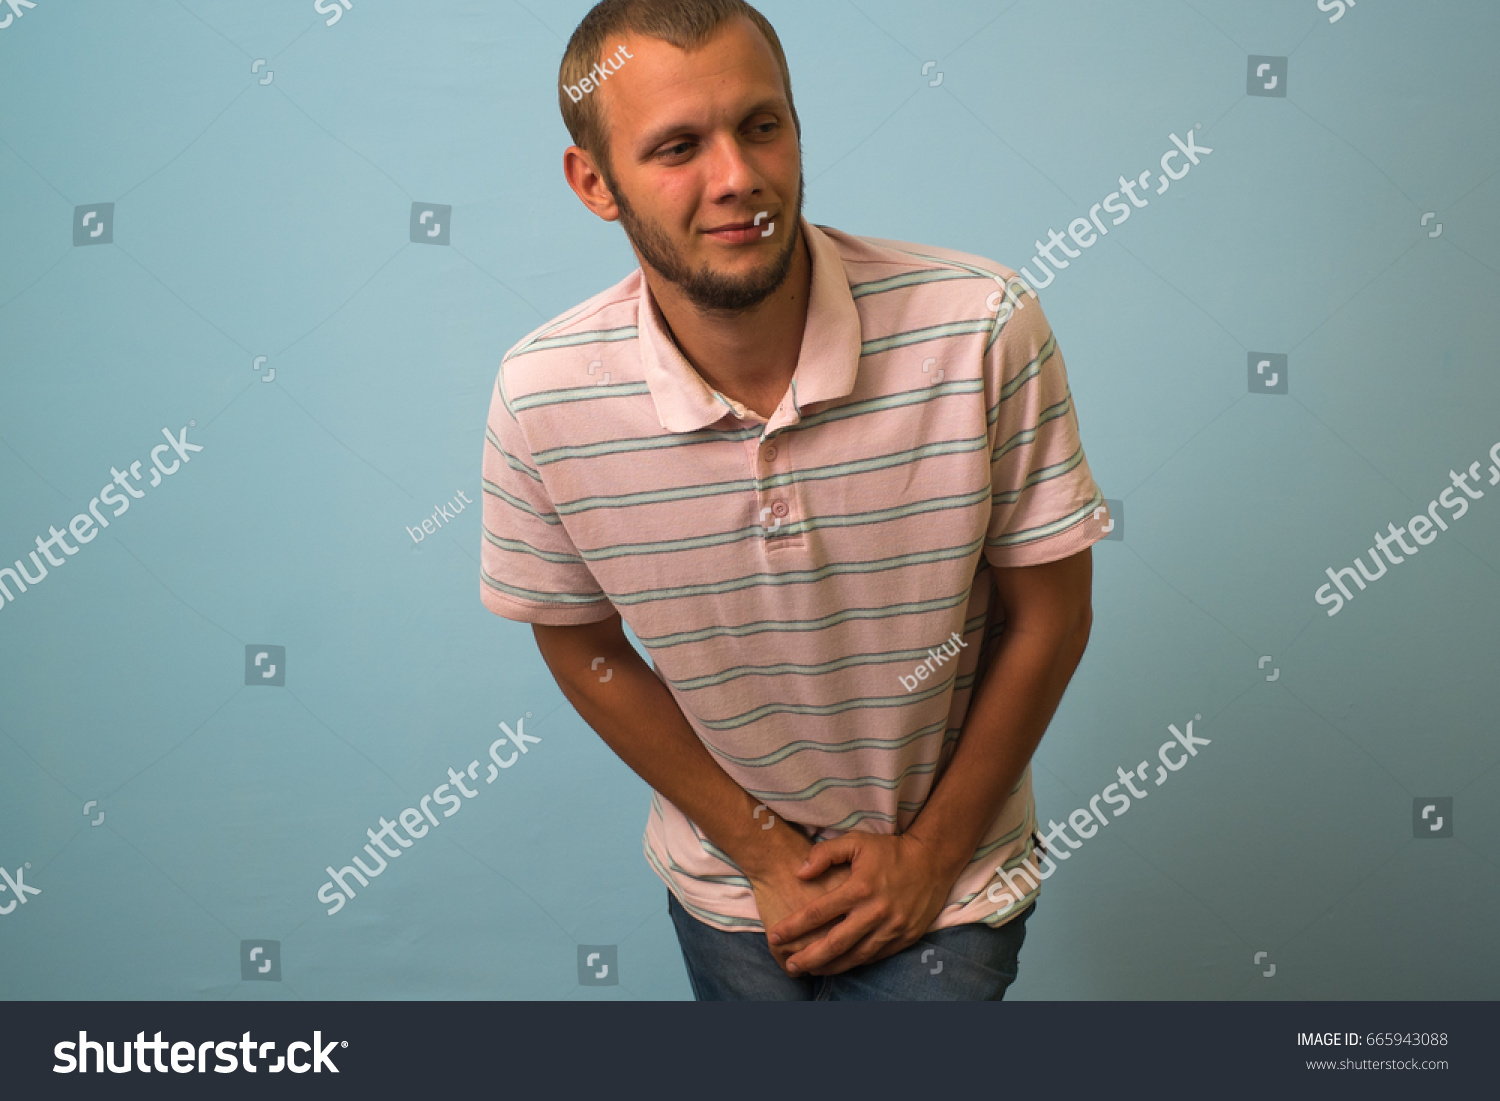 Man Hands Holding His Crotch He Stock Photo 665943088 Shutterstock